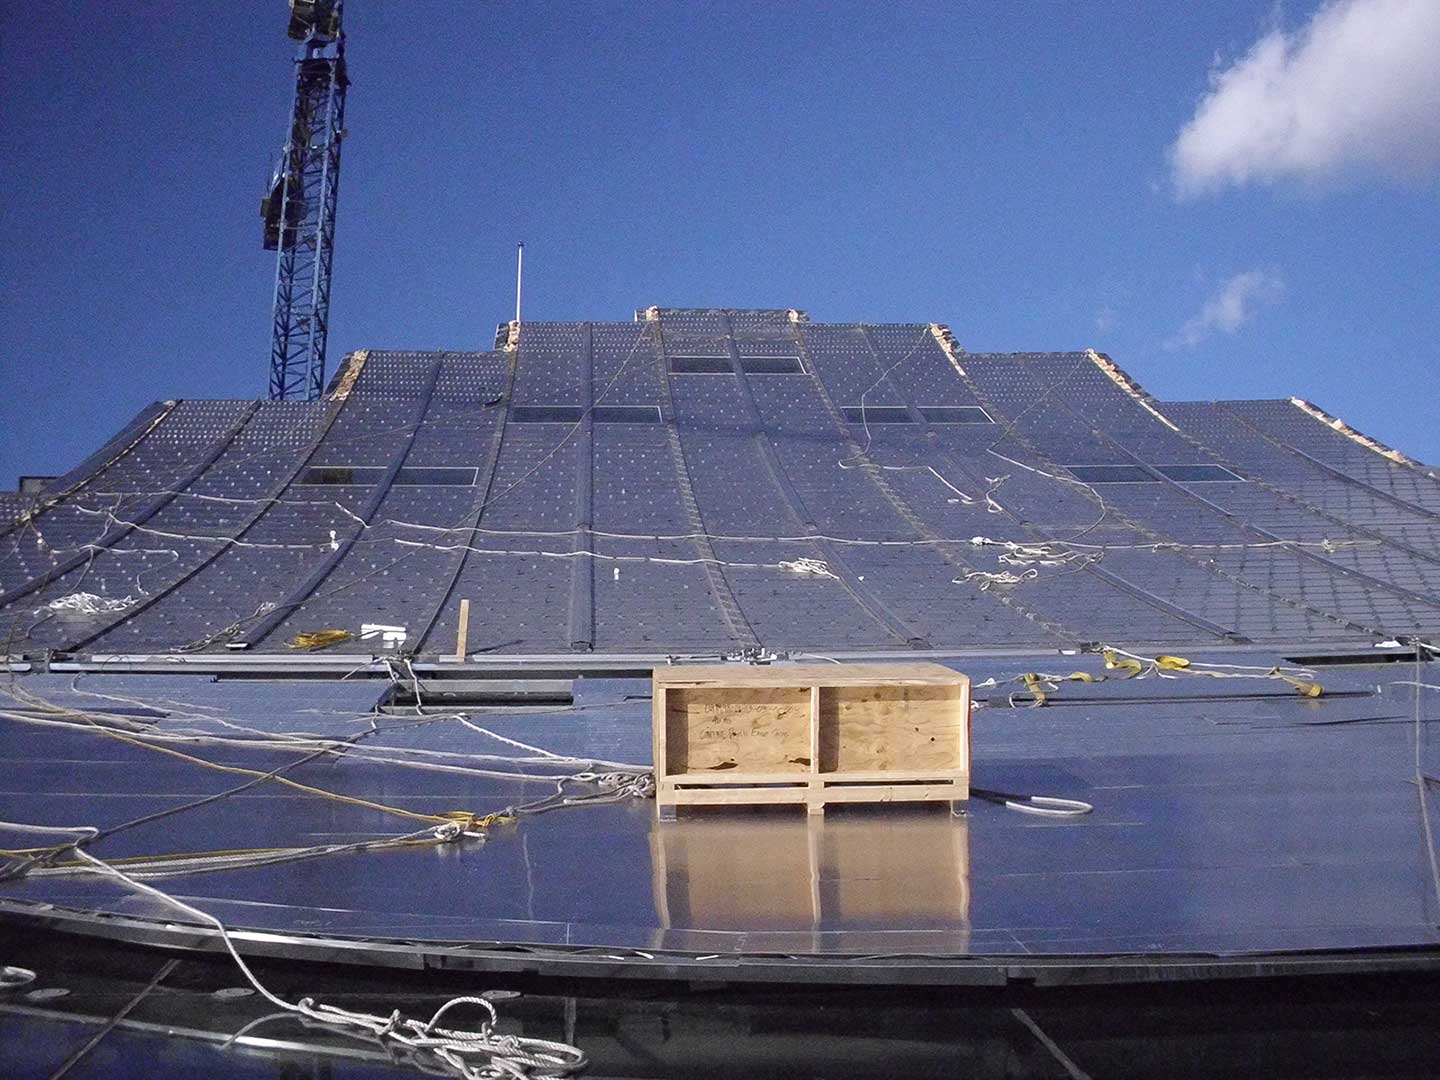 Field operators install the ZEPPS™ Panels on the South roof of Kauffman Center